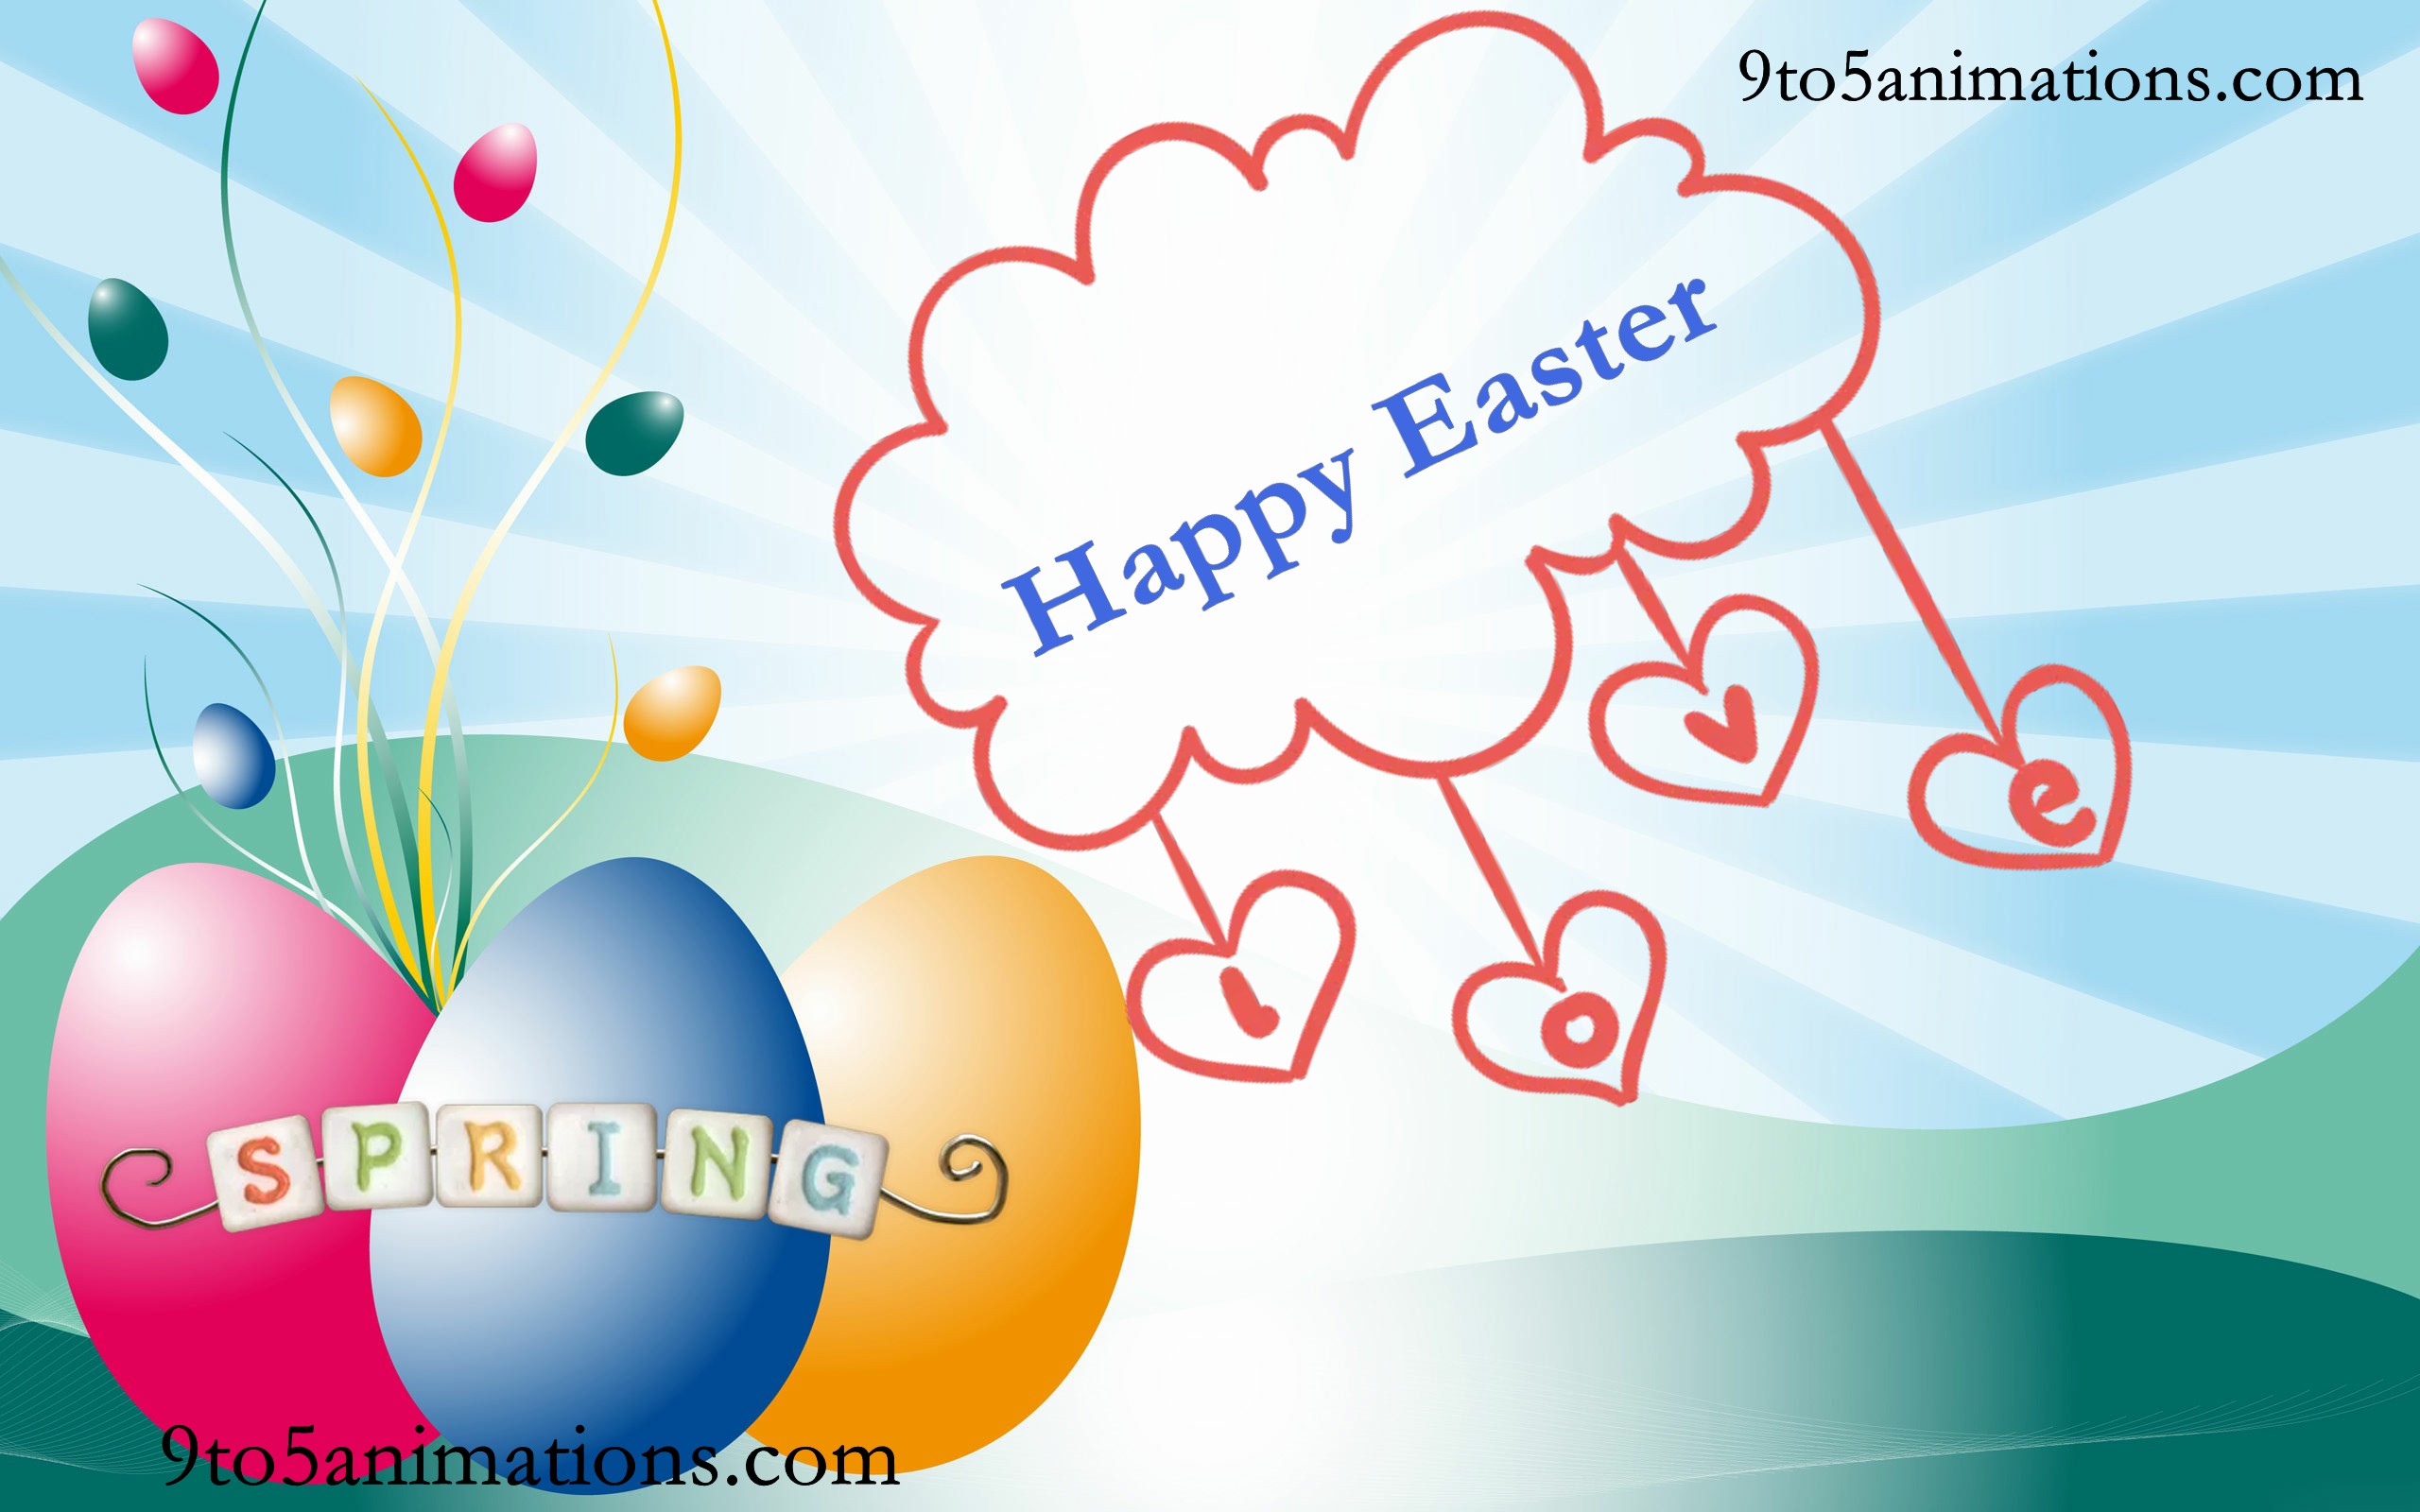 Easter Wallpaper 9to5animations